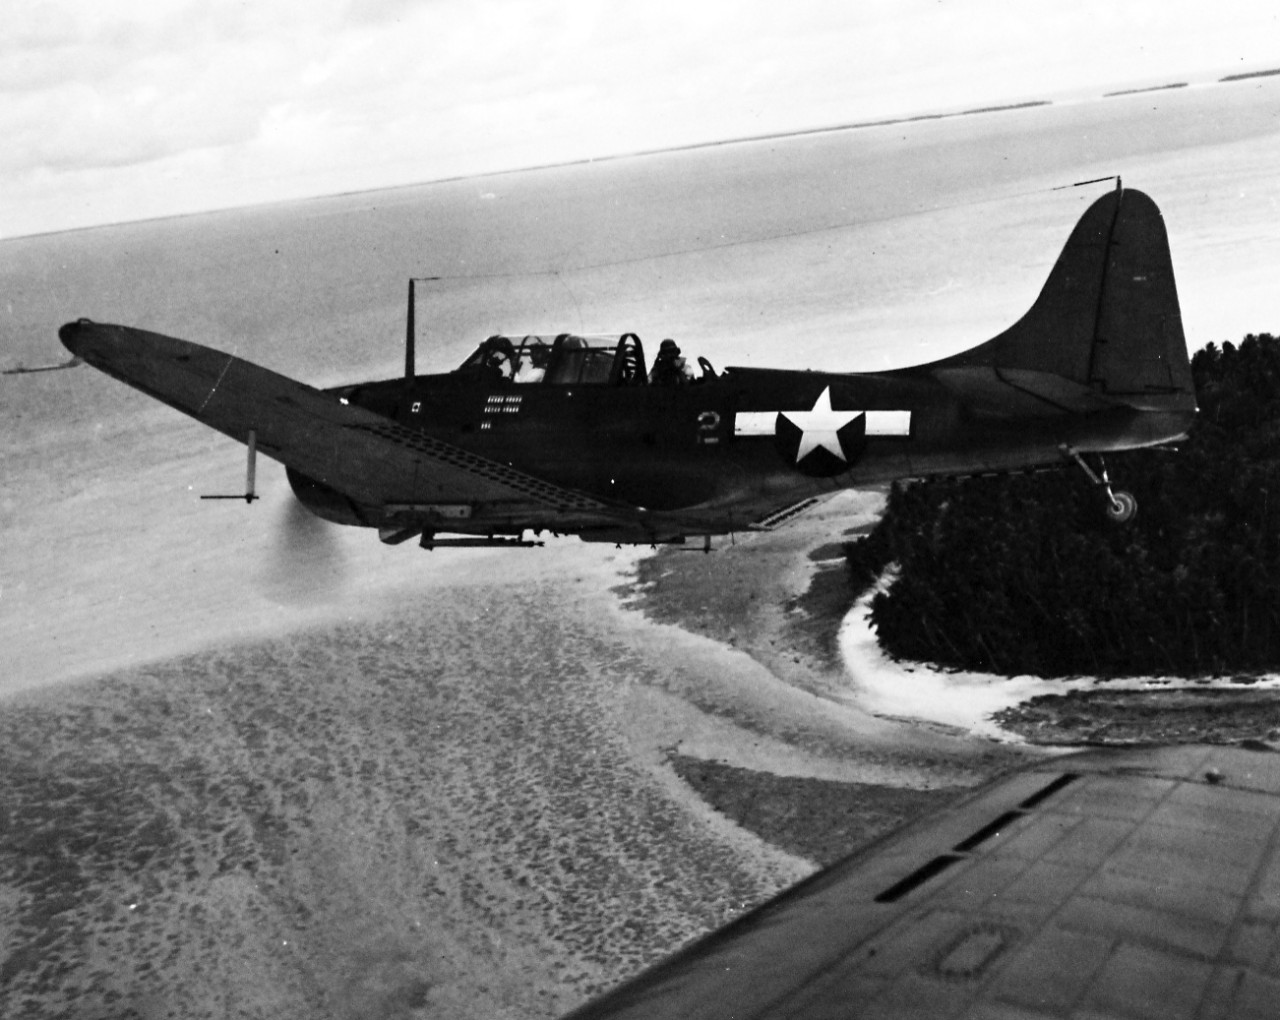 80-G-234787:  SBD-5 over Majuro Atoll, 1944.   Aircraft was from USS Lexington (CV-16).    Photograph released May 13,  944.  Aircraft was piloted by Captain Bell, USMC, VMSB 231 and was carrying a Navy photographer.      Official U.S. Navy photograph, now in the collections of the National Archives.  (2016/11/15).